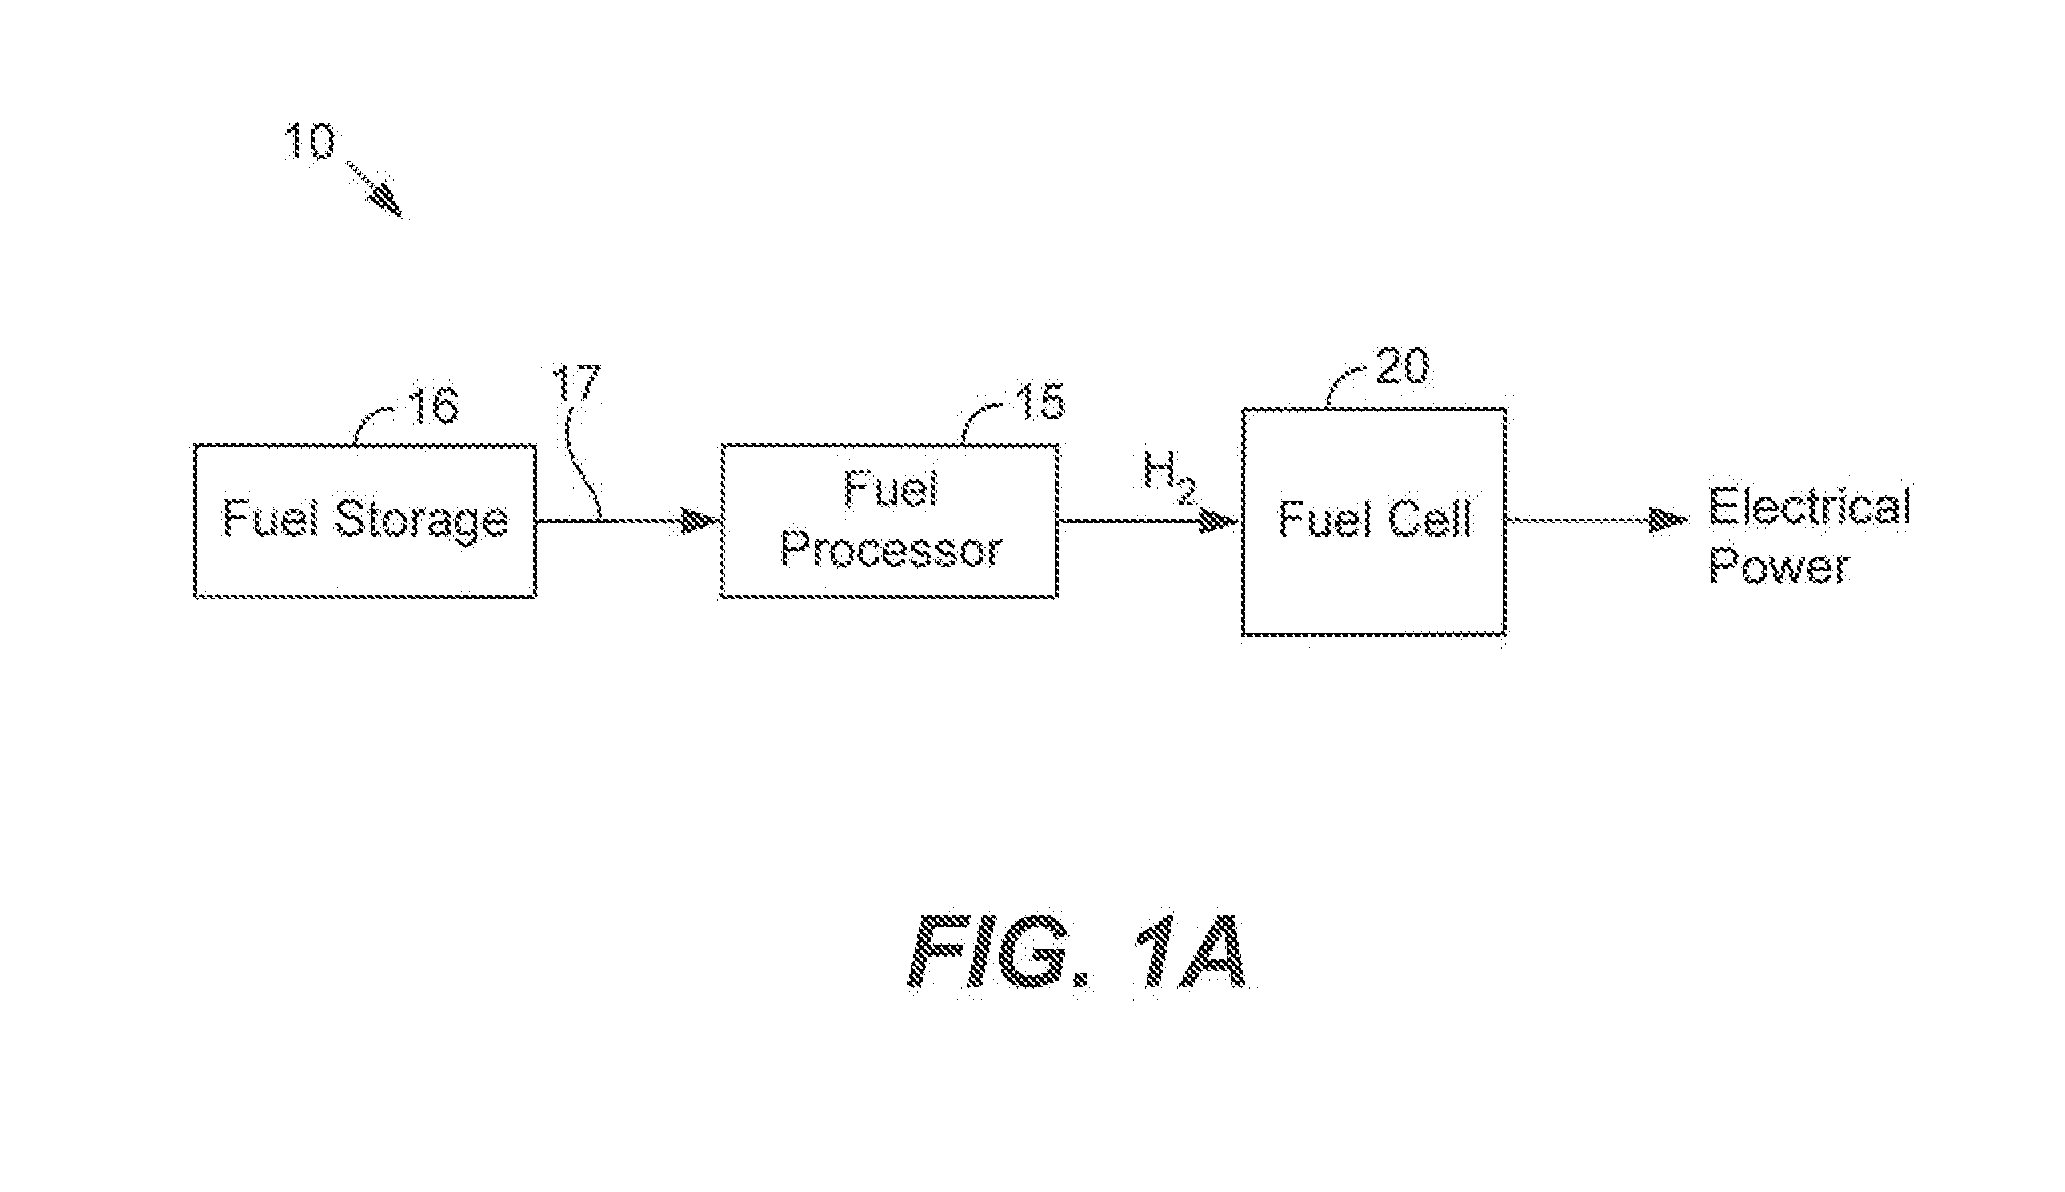 Fuel processor for use with portable fuel cells